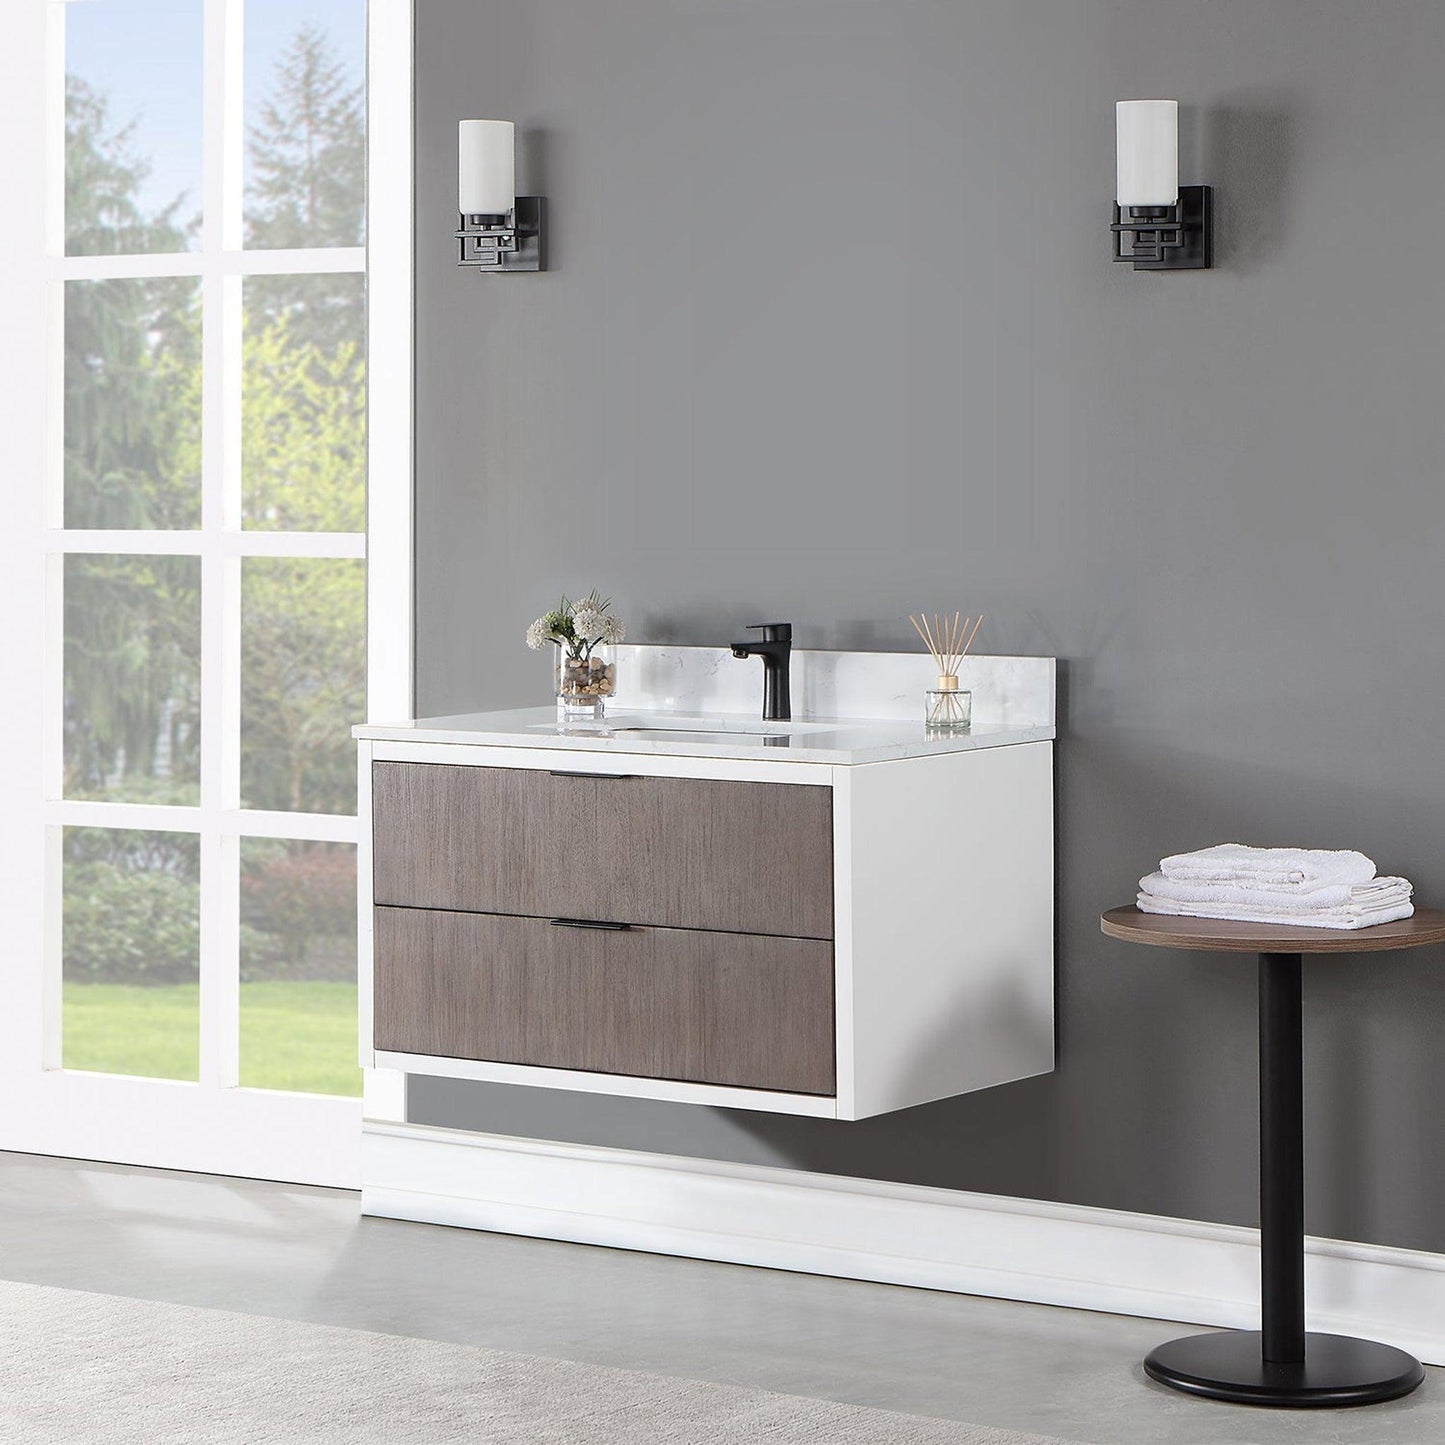 Altair Dione 36" Single Classical Gray Wall-Mounted Bathroom Vanity Set With Aosta White Composite Stone Top, Single Rectangular Undermount Ceramic Sink, Overflow, and Backsplash